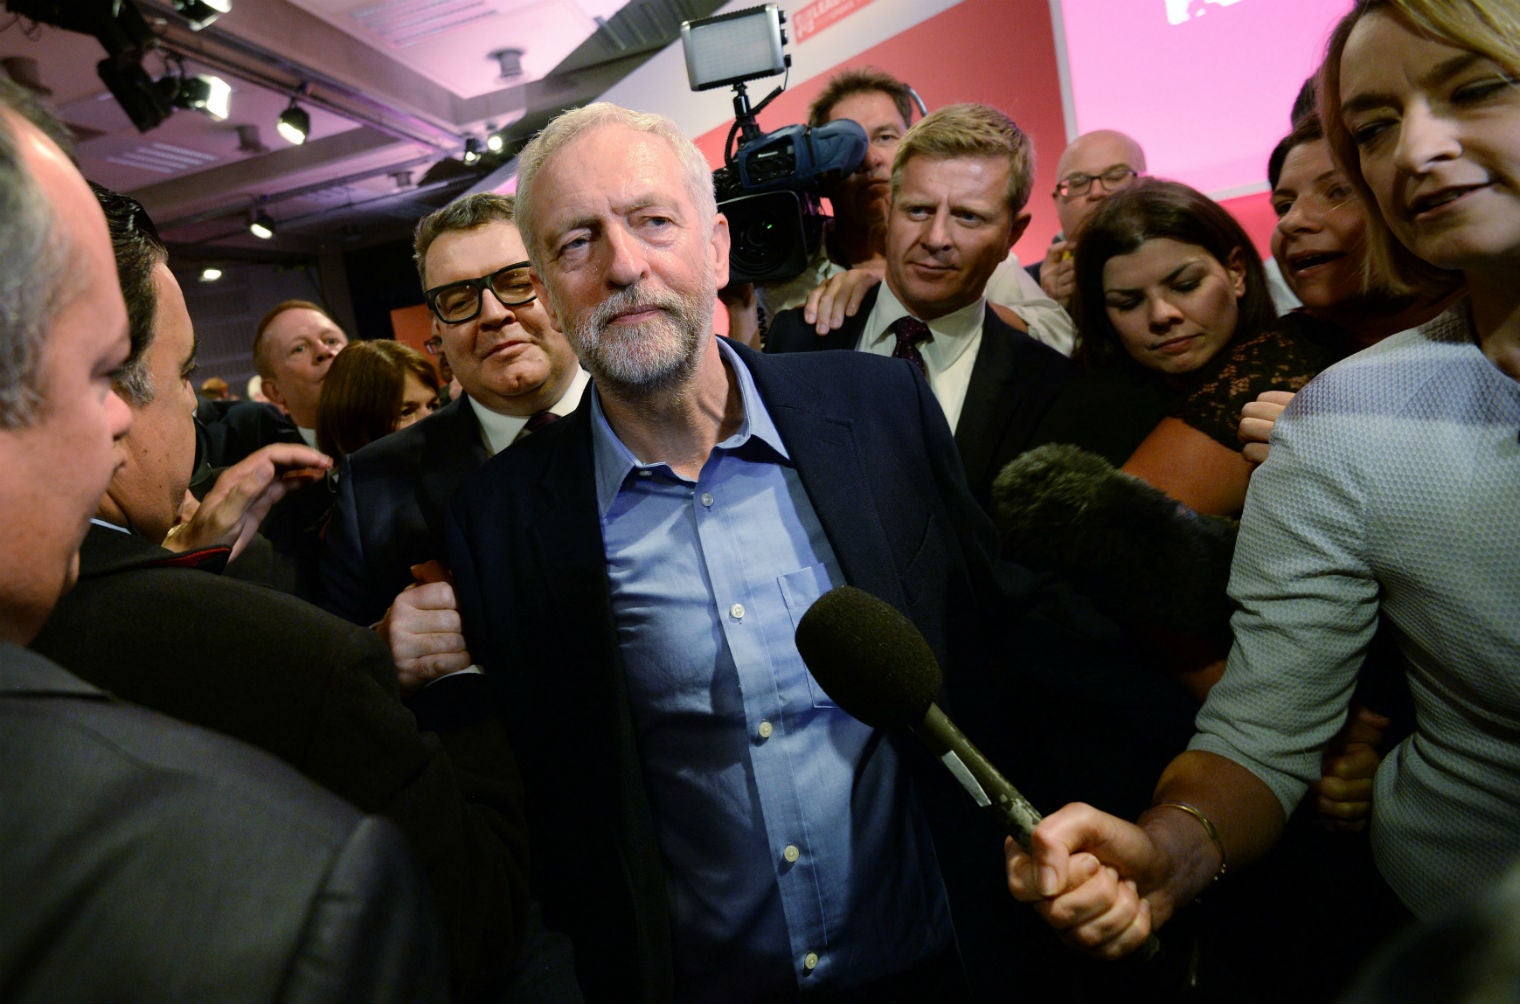 Jeremy Corbyn has previously expressed eurosceptic views